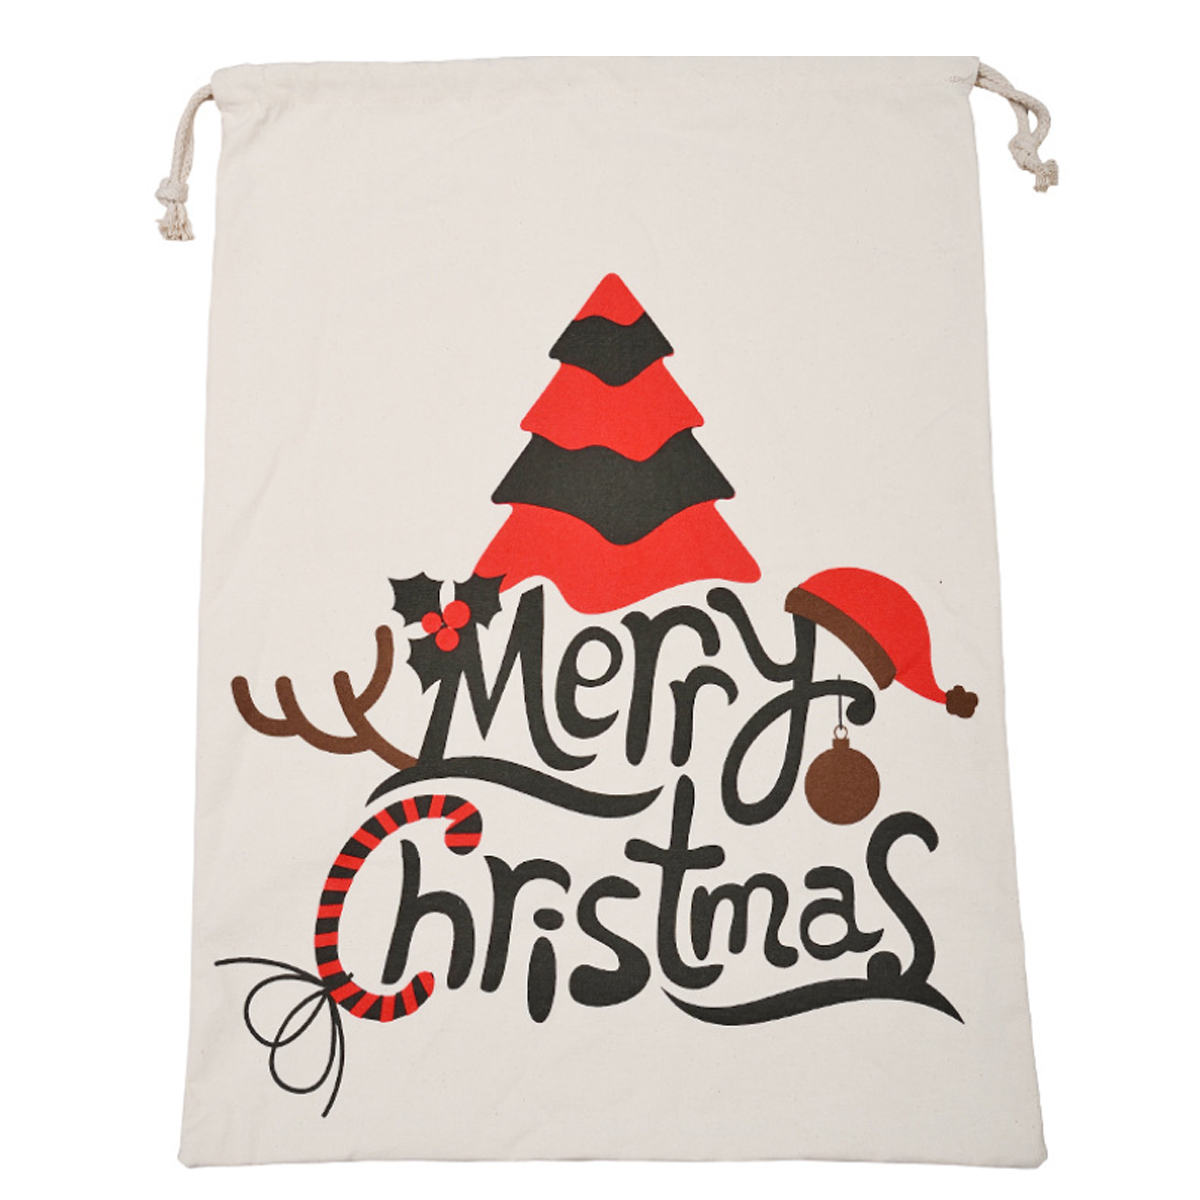 Santa-Sack-Canvas-Bag-Party-Christmas-Candy-Bags-Xmas-Decorations-for-Kids-Gift-1589089-8